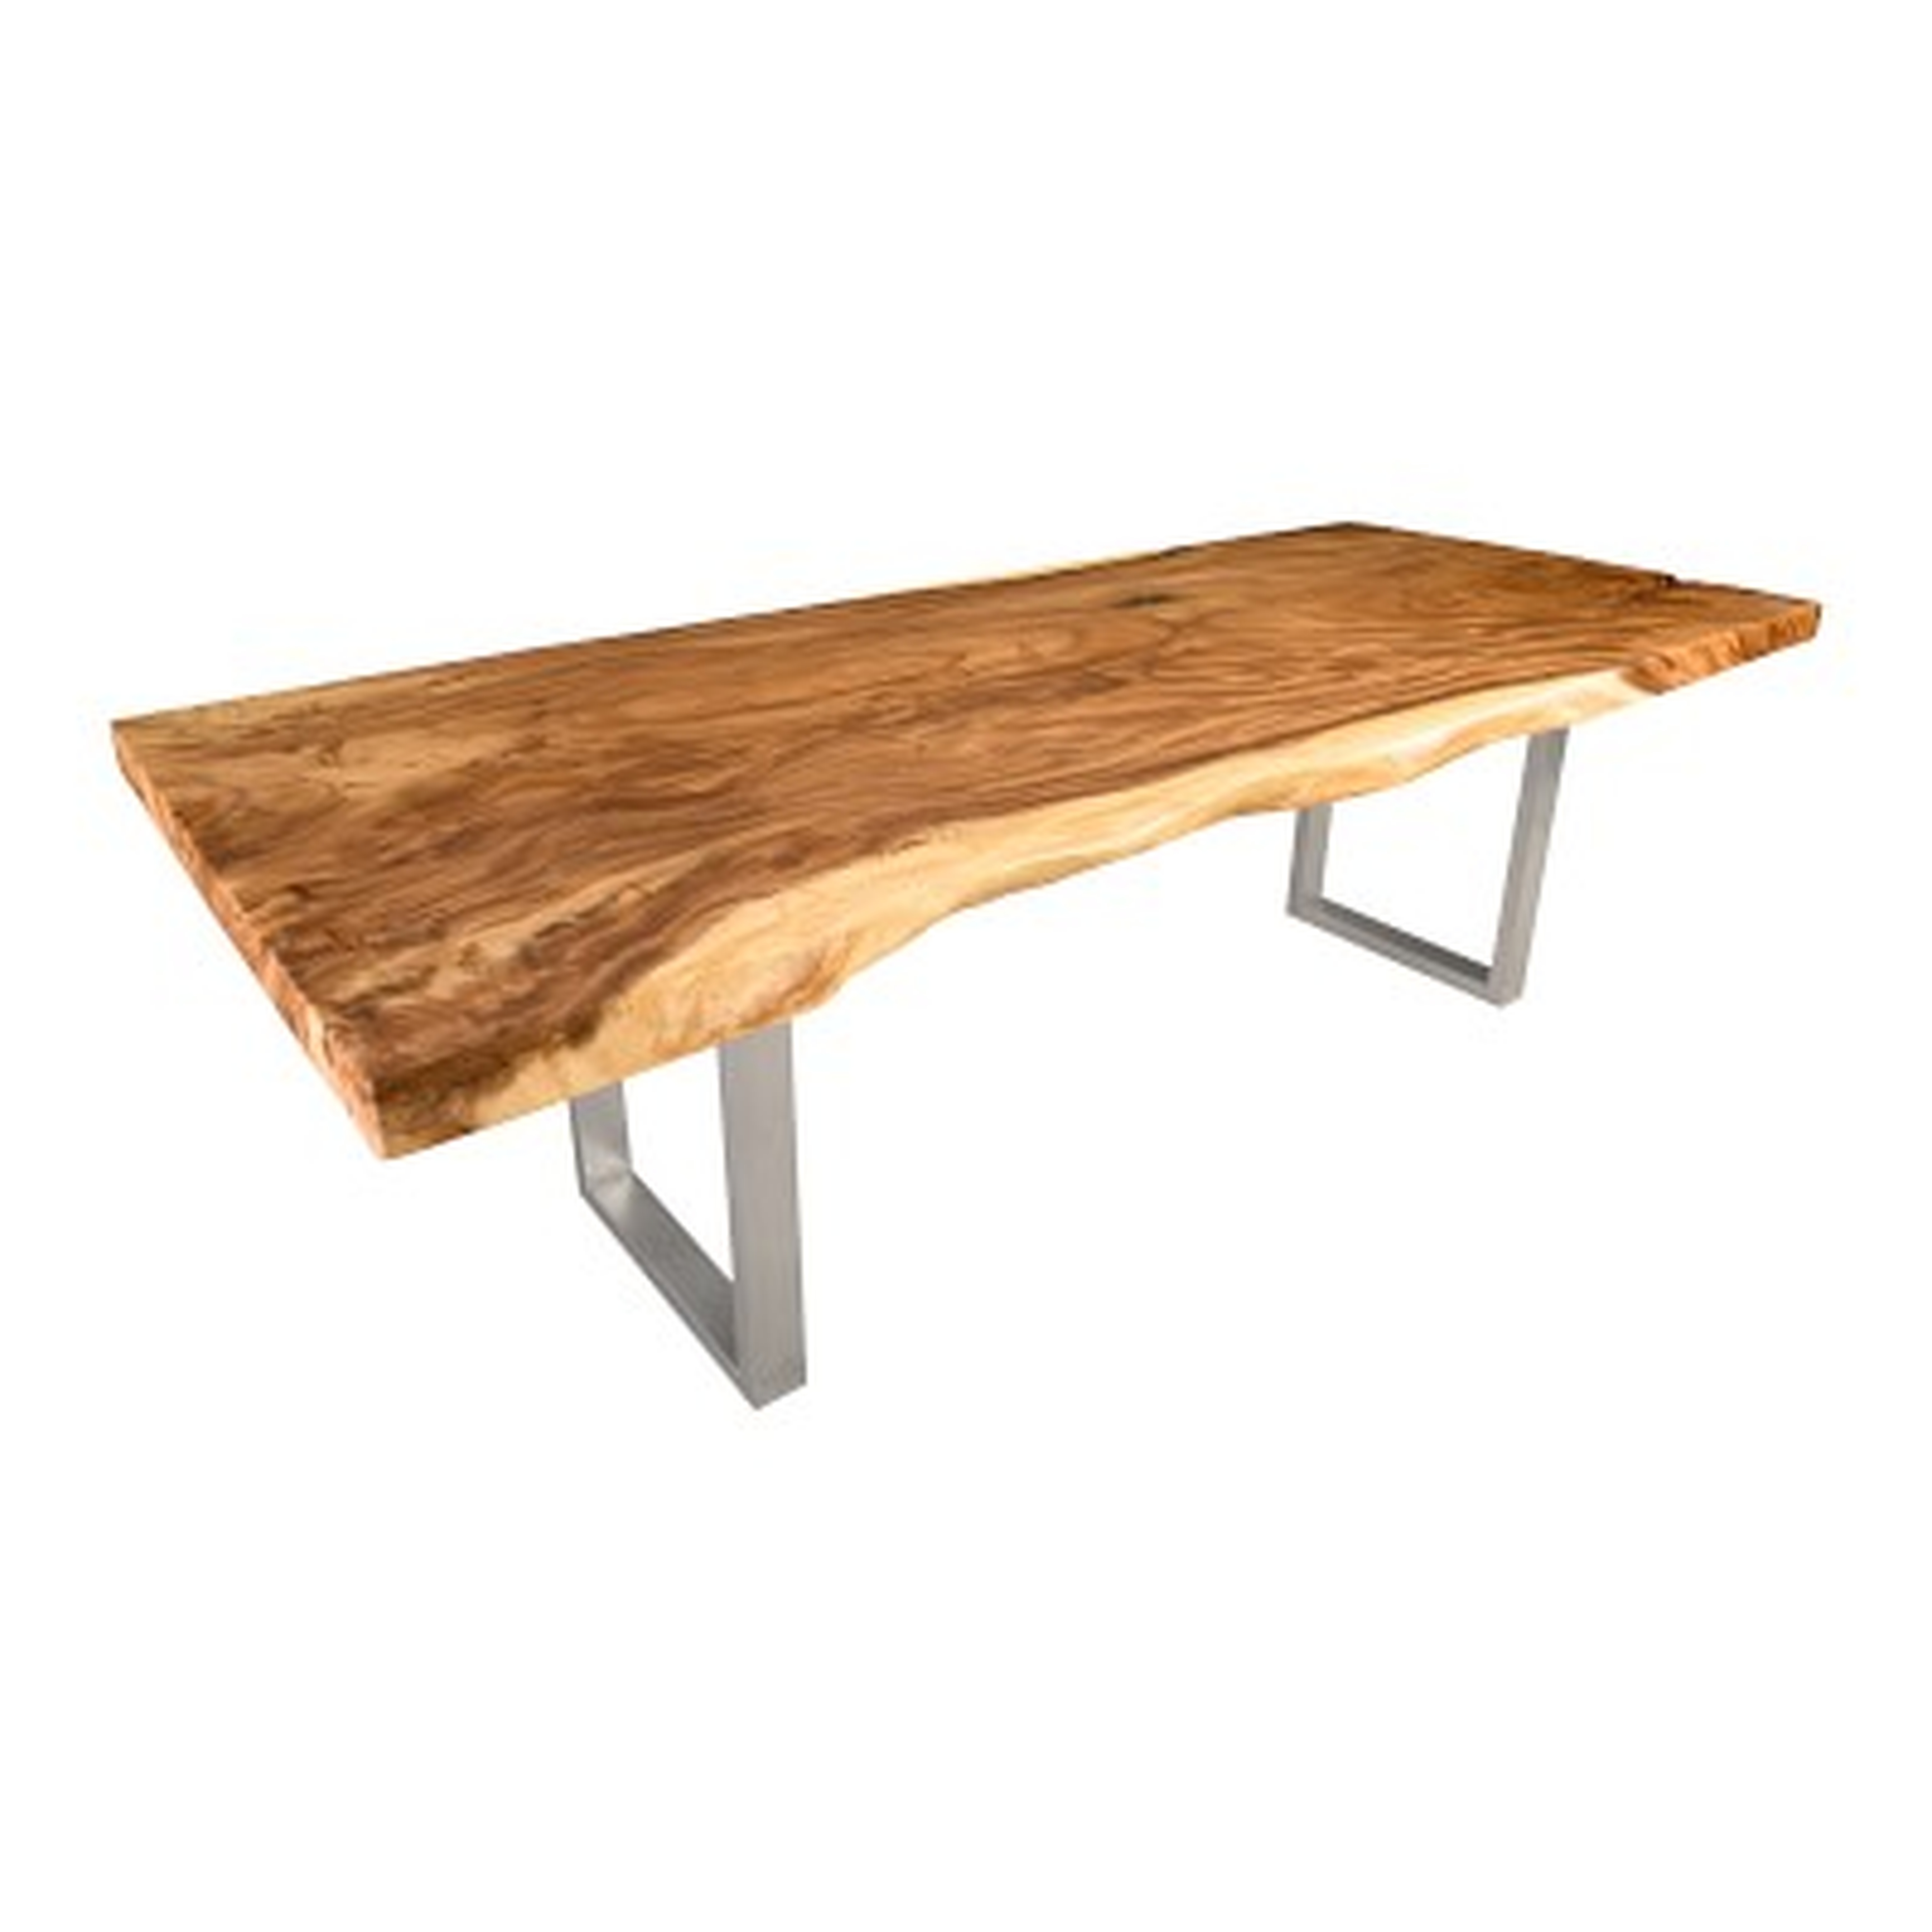 Wilton Live Edge Dining Table, 108", Wood, Natural, Stainless Steel - Williams Sonoma